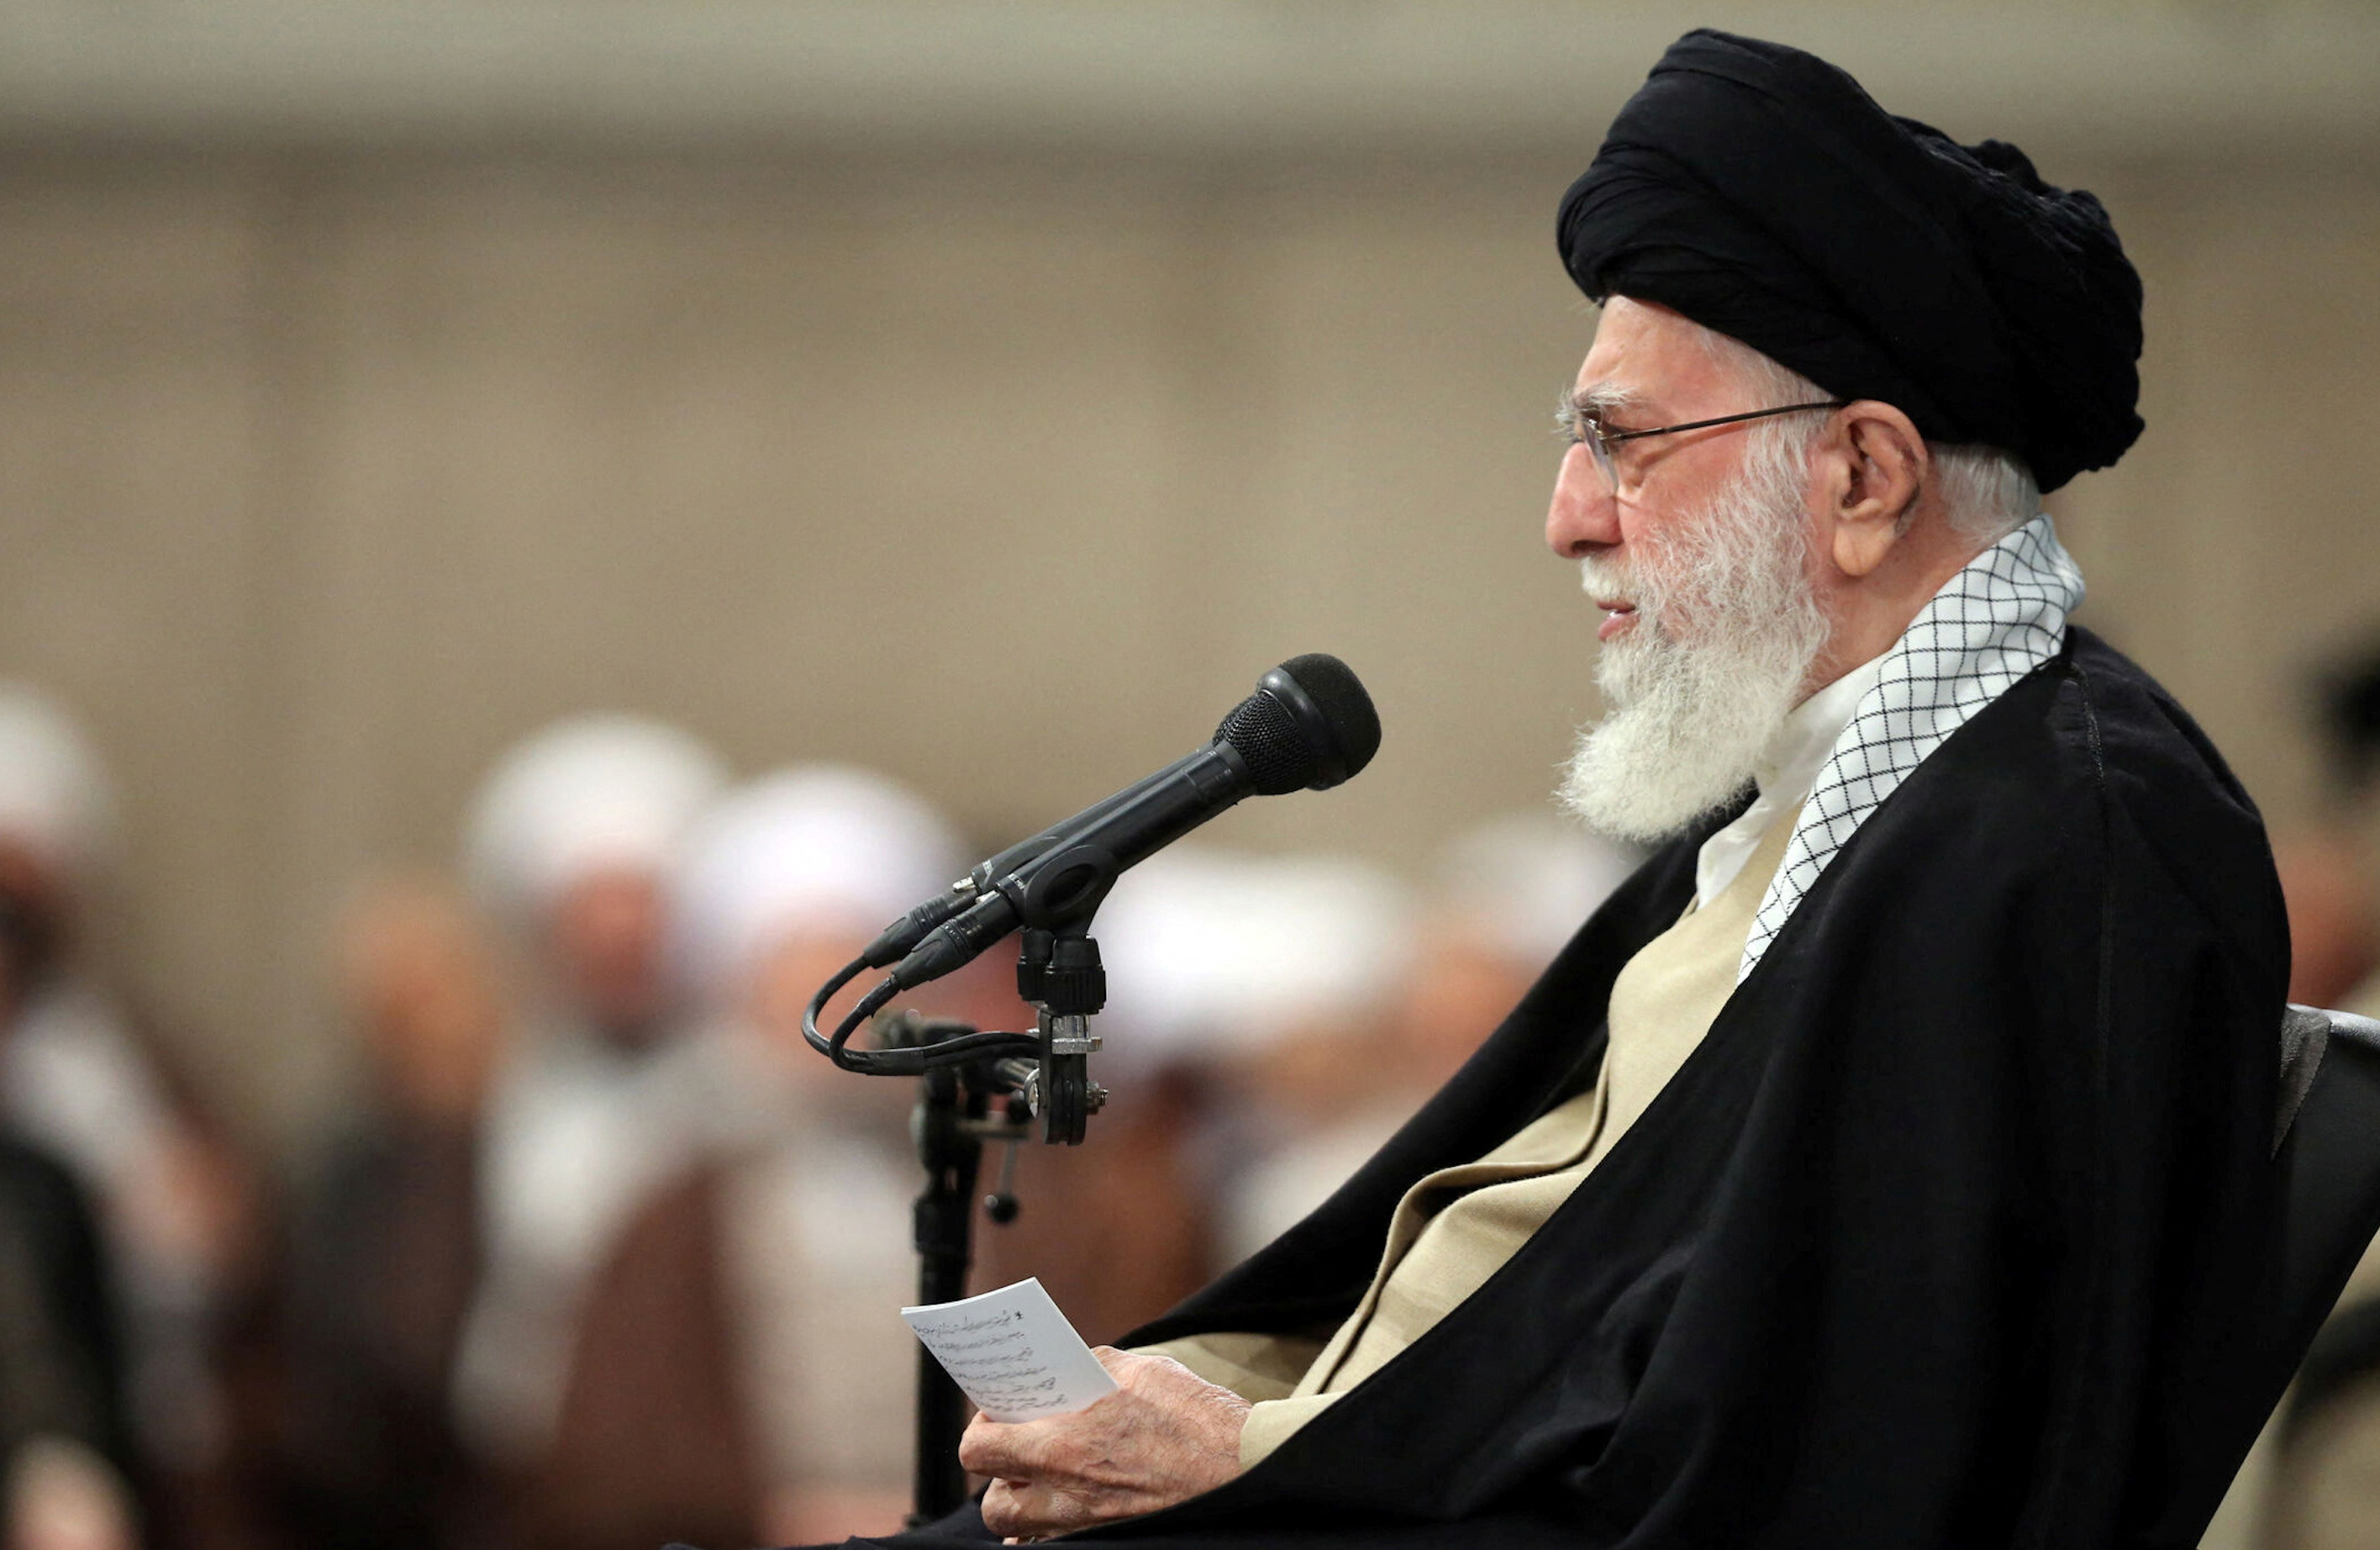 Iran's Khamenei says no one can stop “resistance forces” if Israel's Gaza assault persists